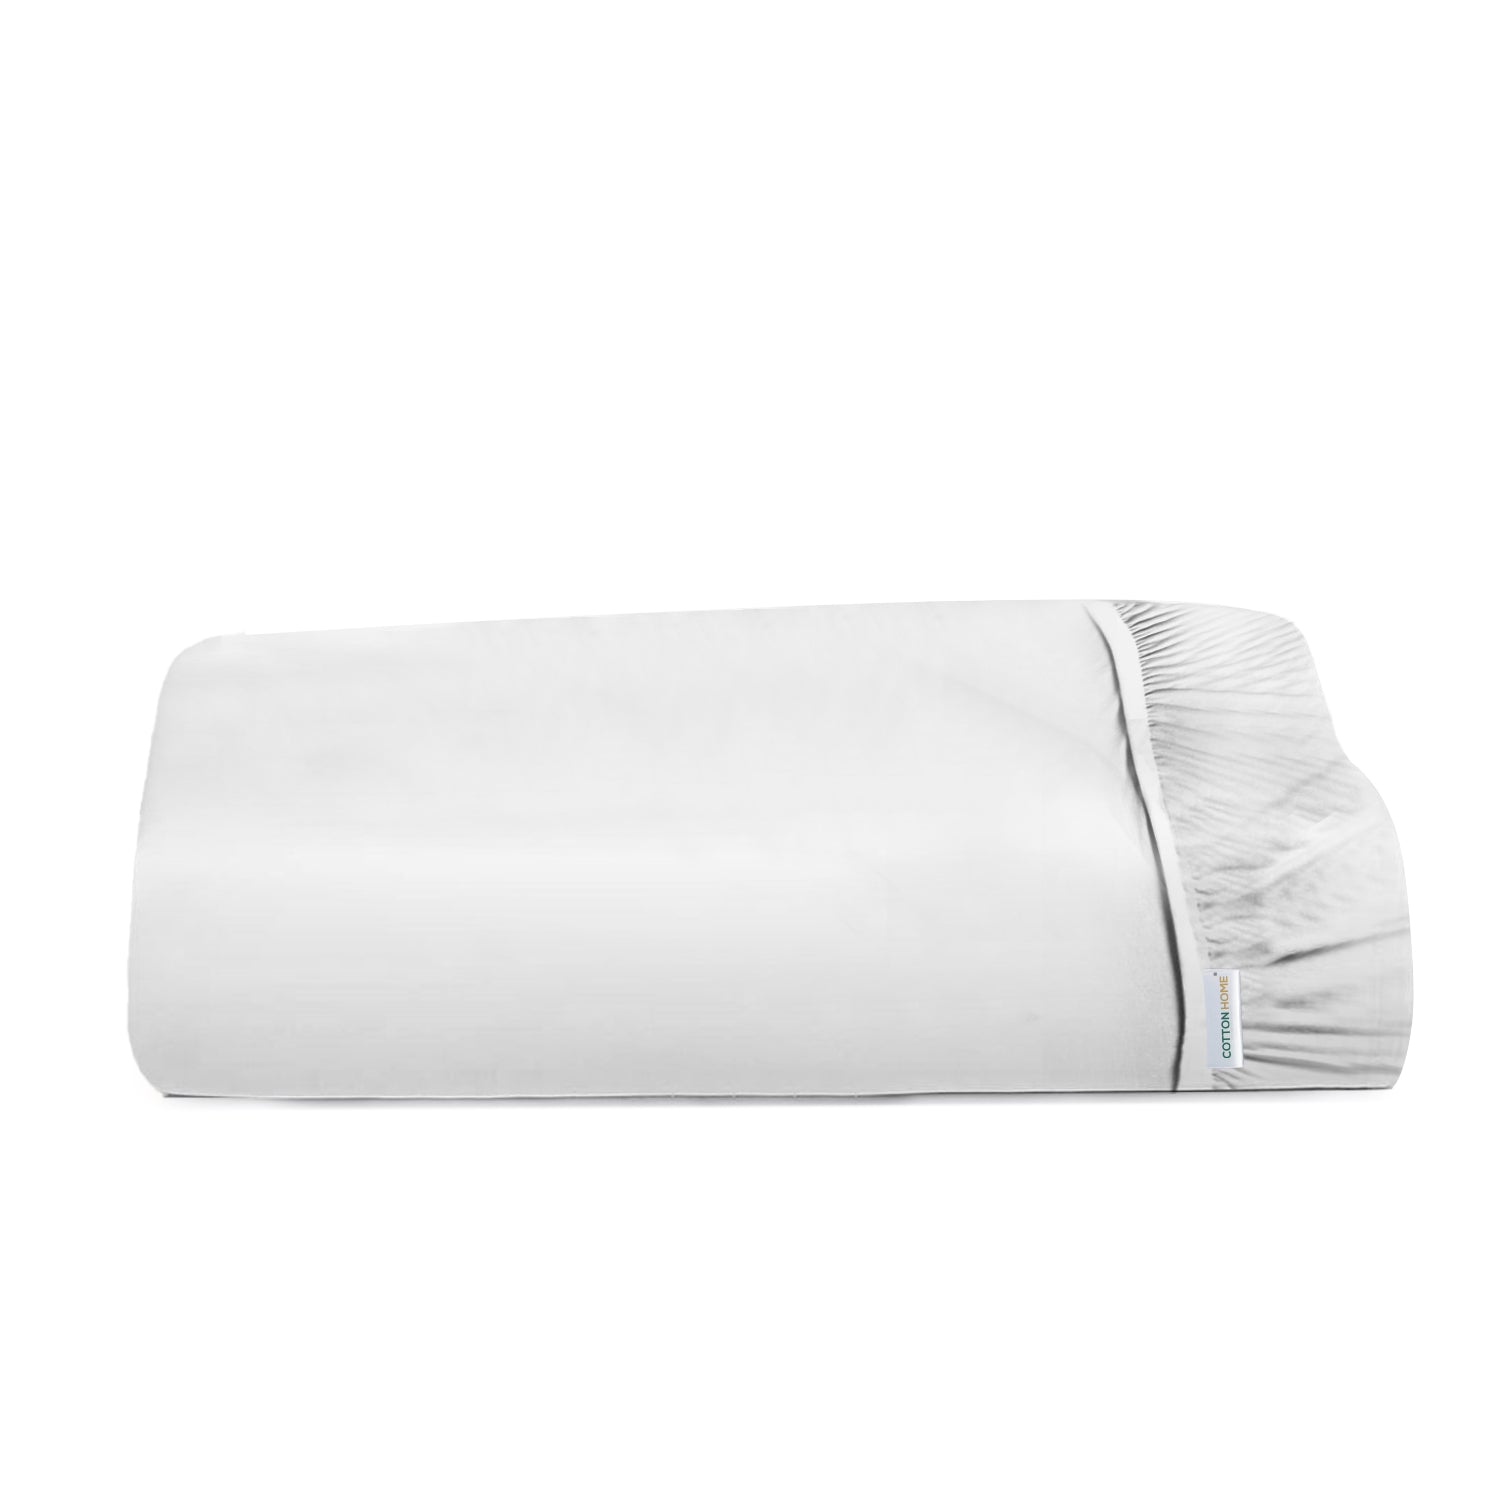 Premium Quality Super Soft White Fitted sheet 120x200+25 cm with Deep Pockets